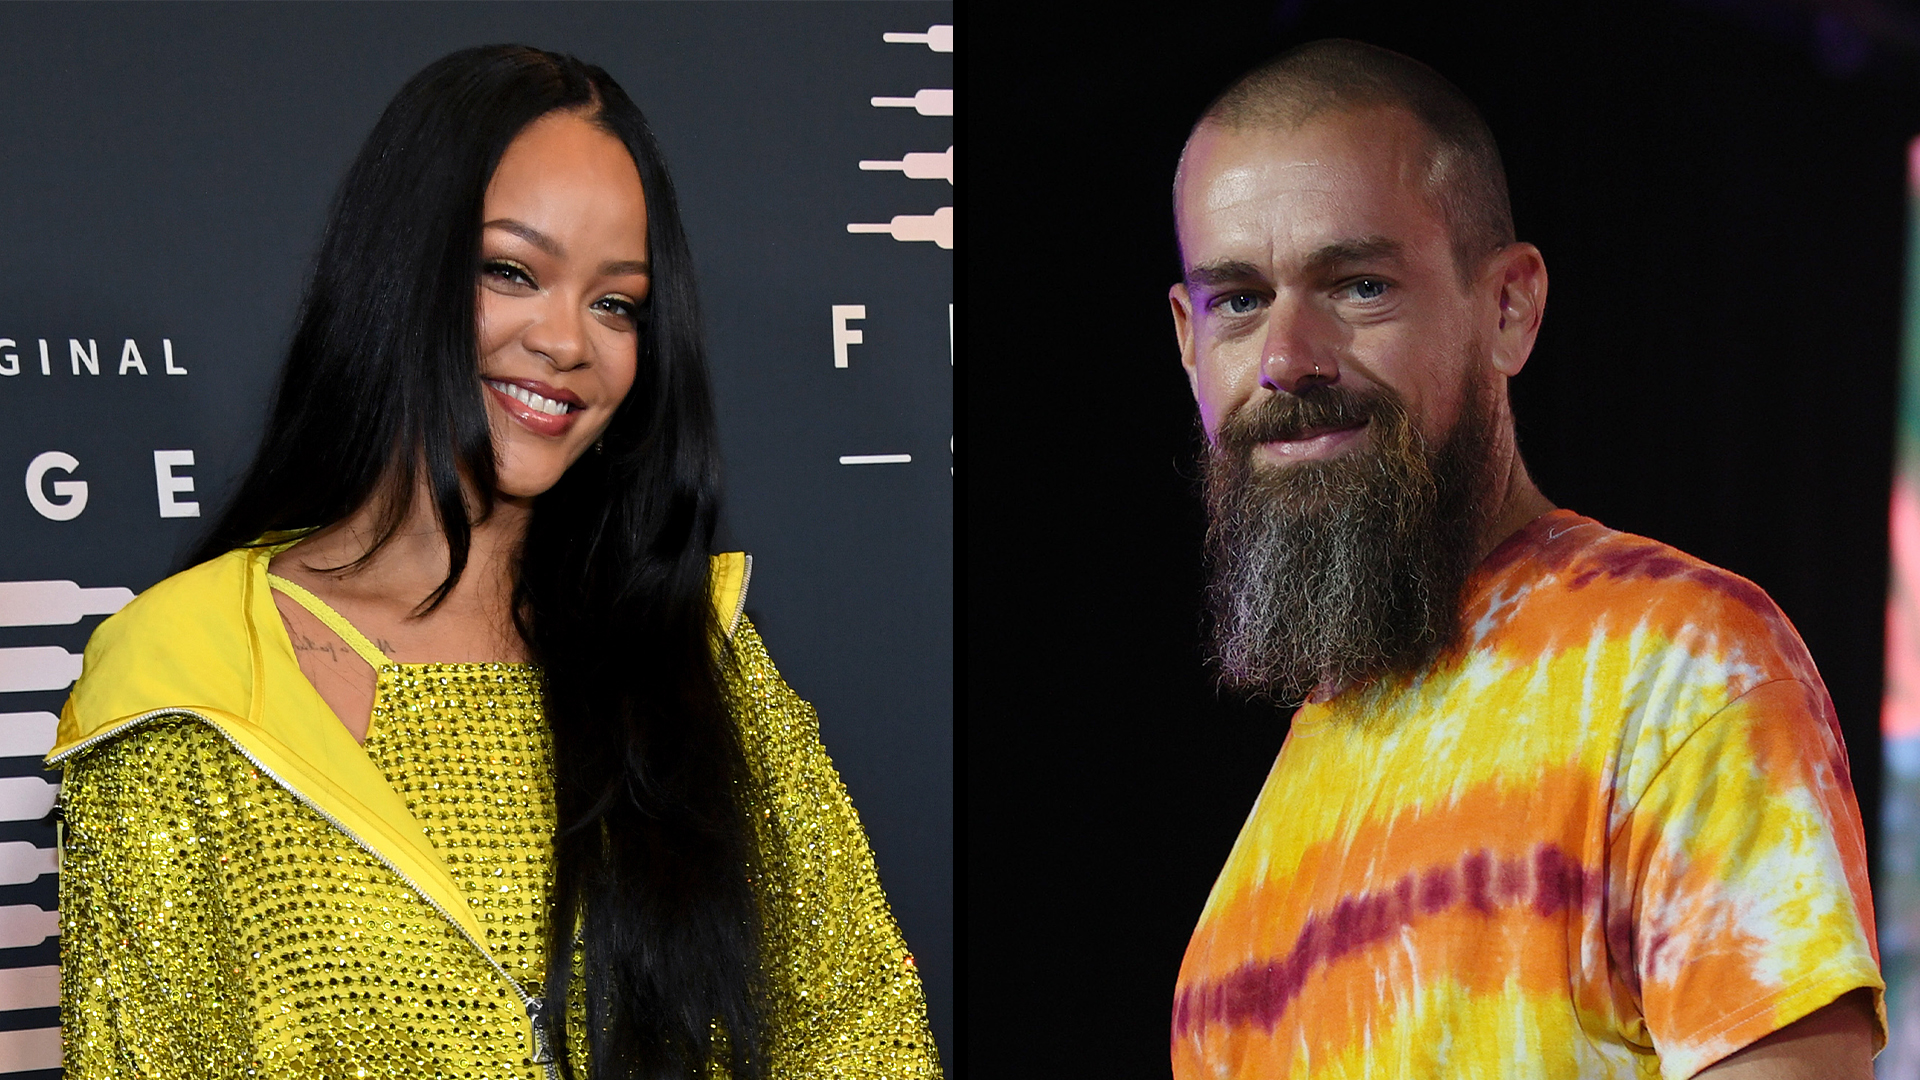 Rihanna's Foundation Pledges $15M To Climate Justice, Joins Jack Dorsey's #StartSmall Initiative